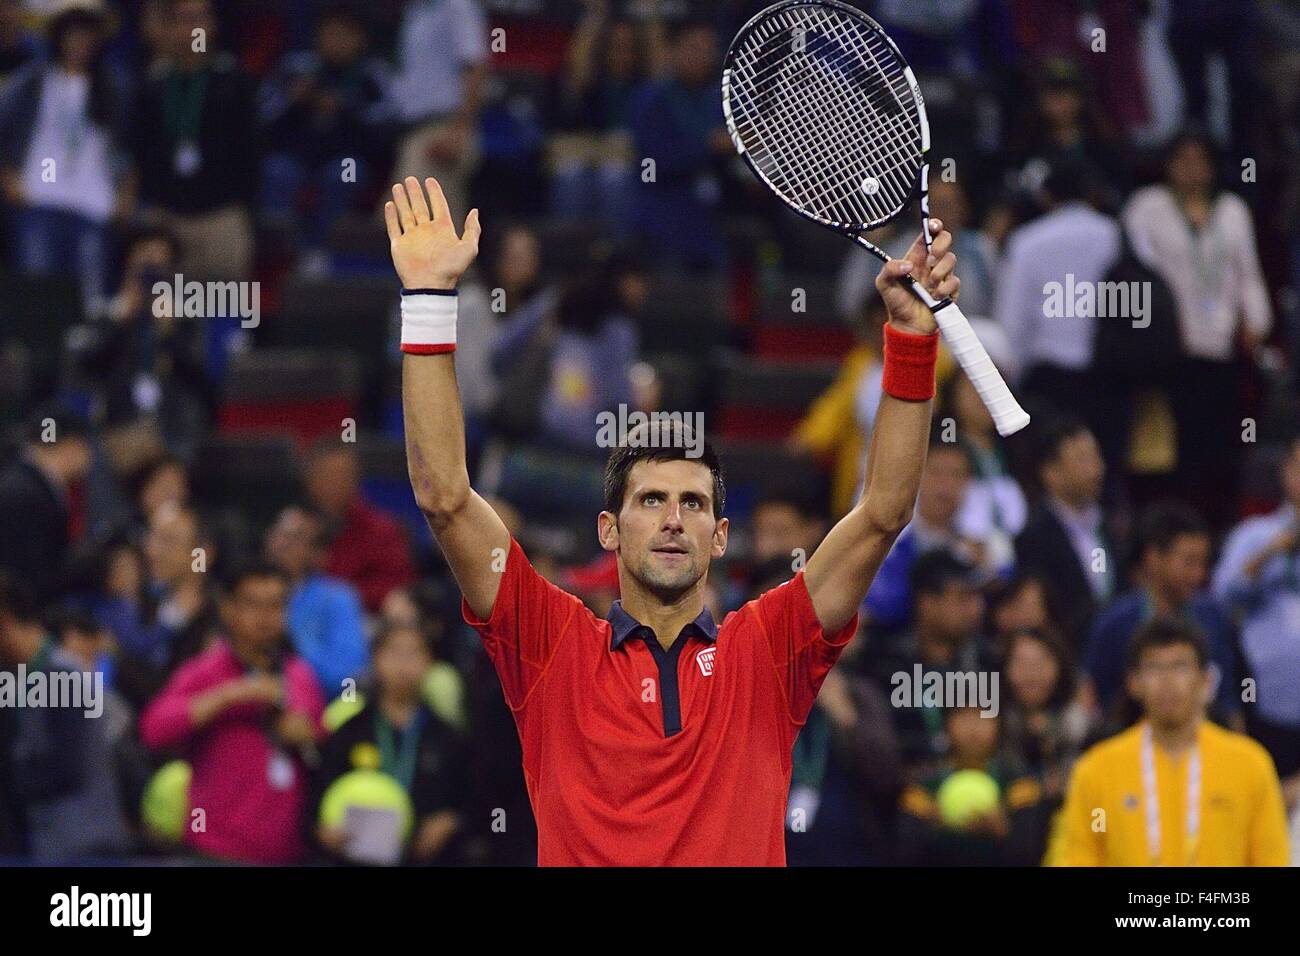 Shanghai, China. 17th October, 2015. NOVAK DJOKOVIC of Serbia celebrating after win the match against ANDY MURRAY (GRB) Novak has defeated Murray 2 - 0 during the Shanghai Rolex Masters Tennis Tournament. Credit:  Marcio Machado/ZUMA Wire/Alamy Live News Stock Photo